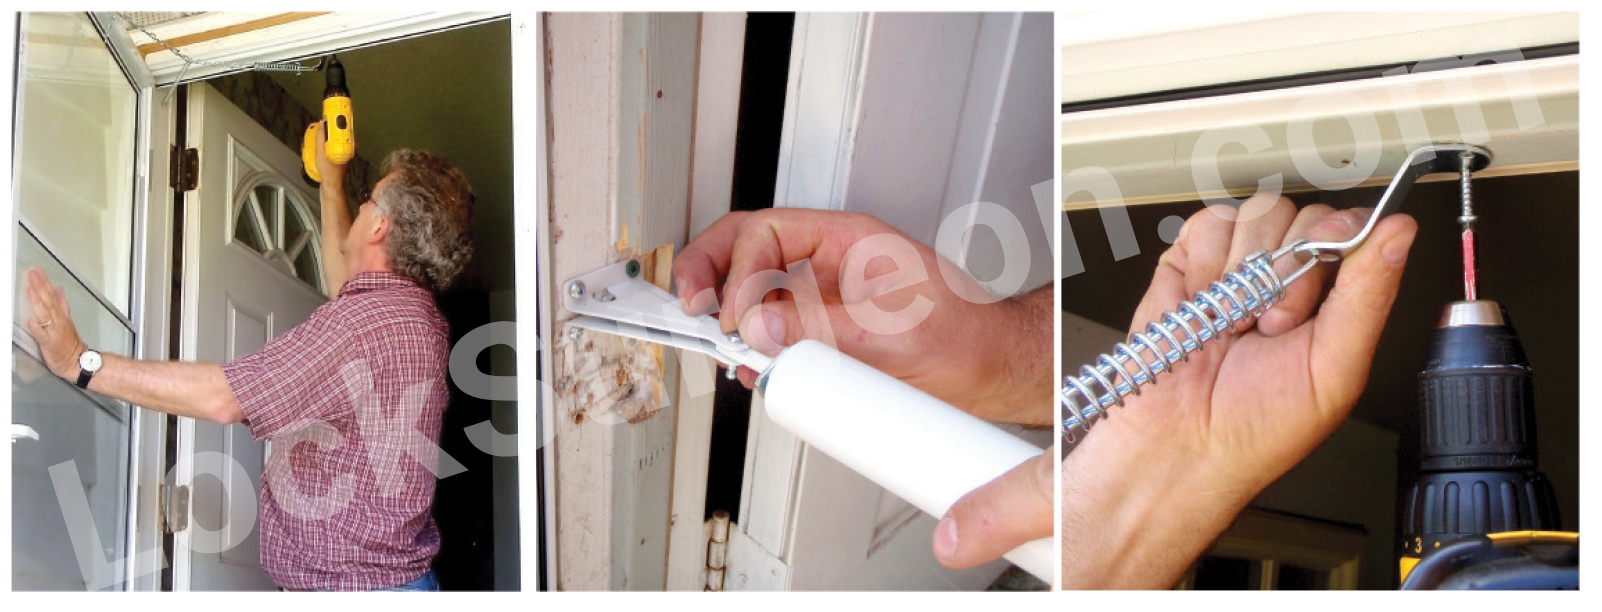 Lock Surgeon mobile screen door installation staff can come to your home.